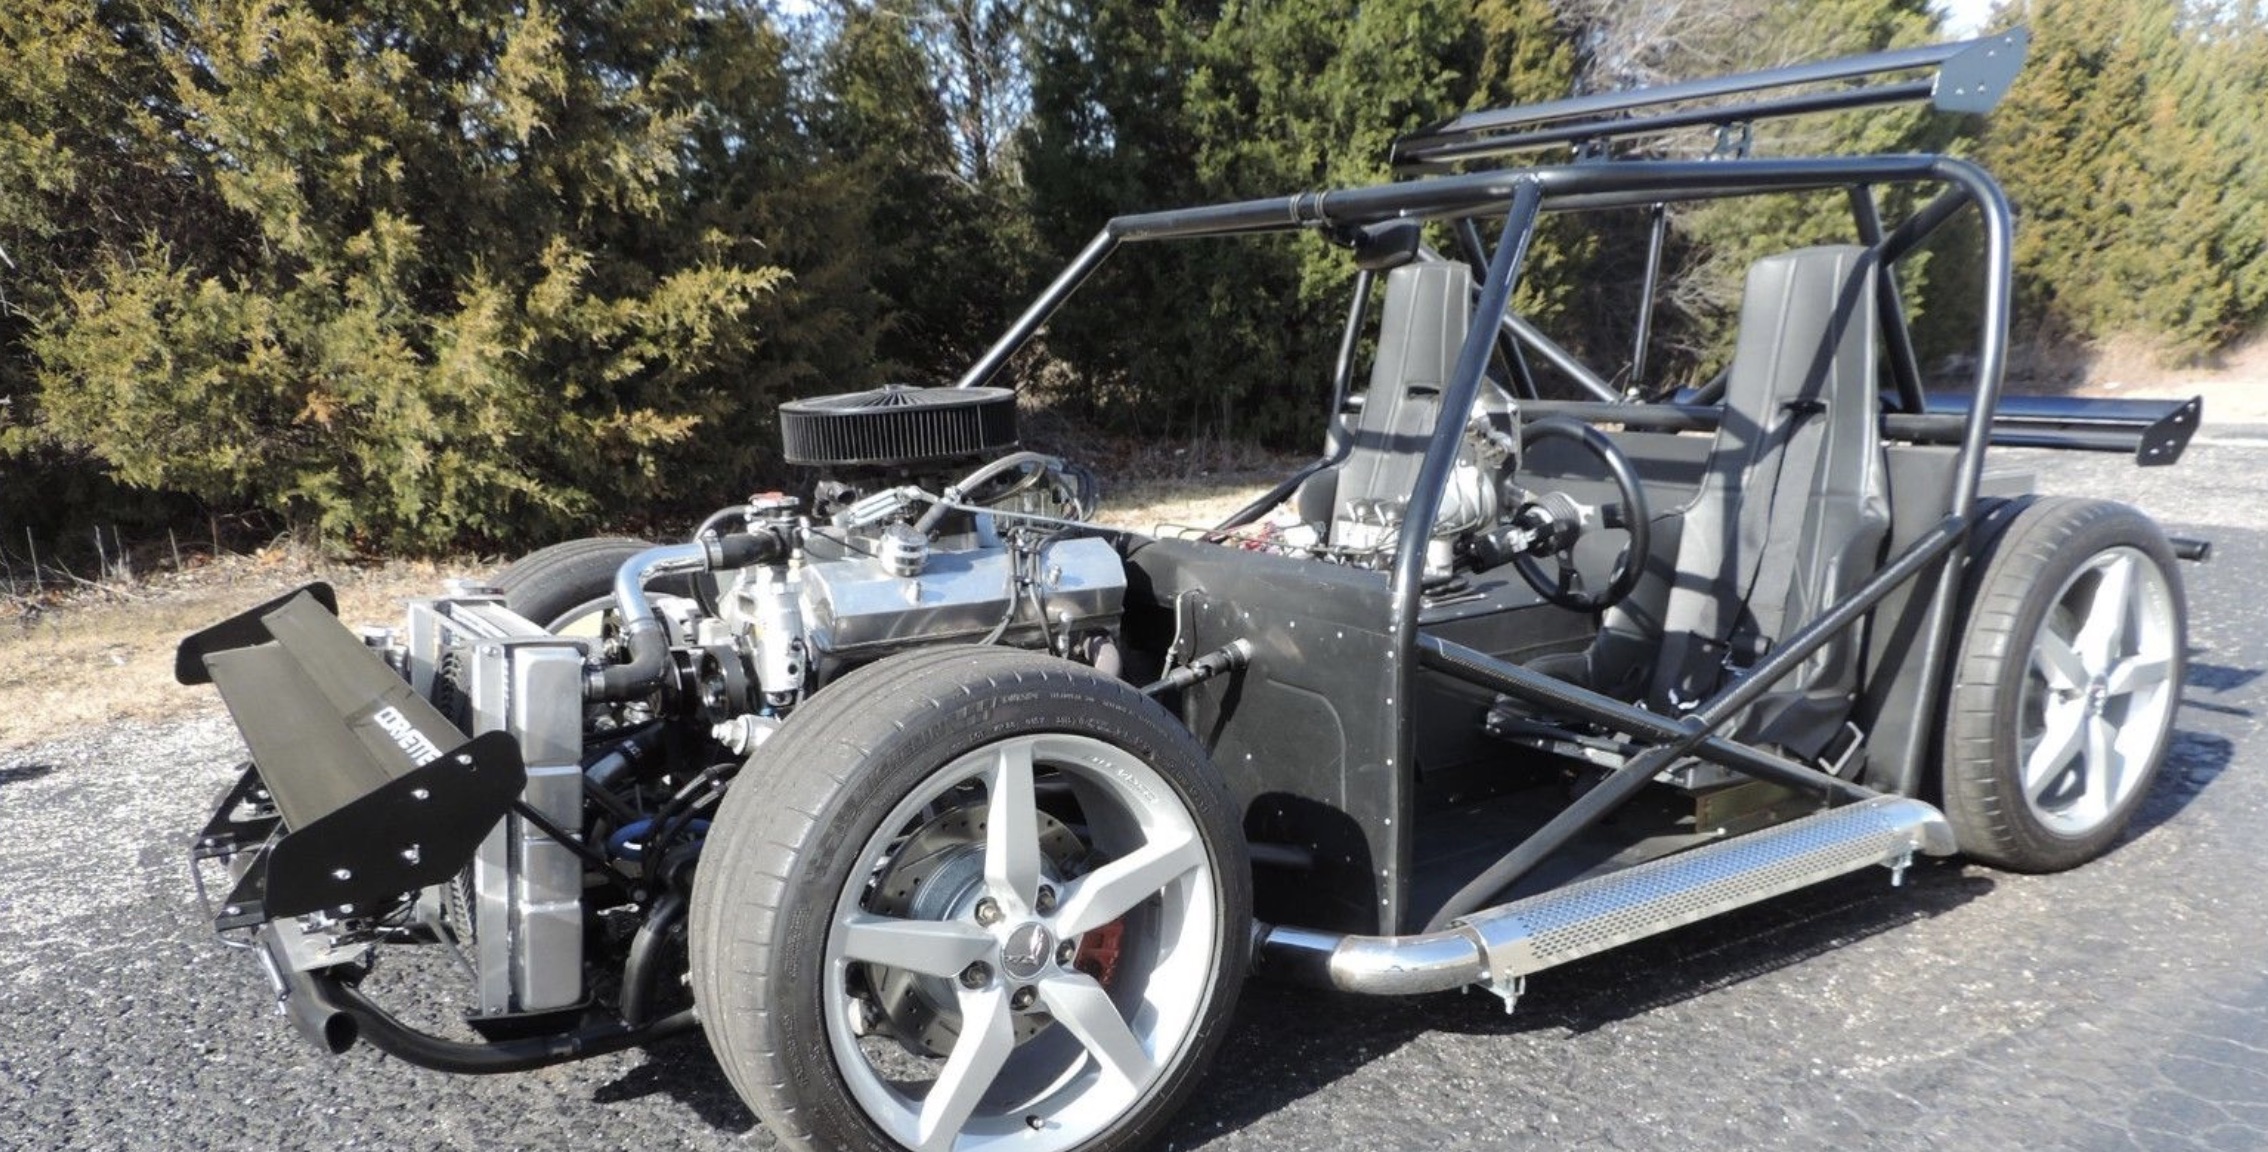 C4 Corvette Go Kart For Sale With 500 Hp Gm Authority